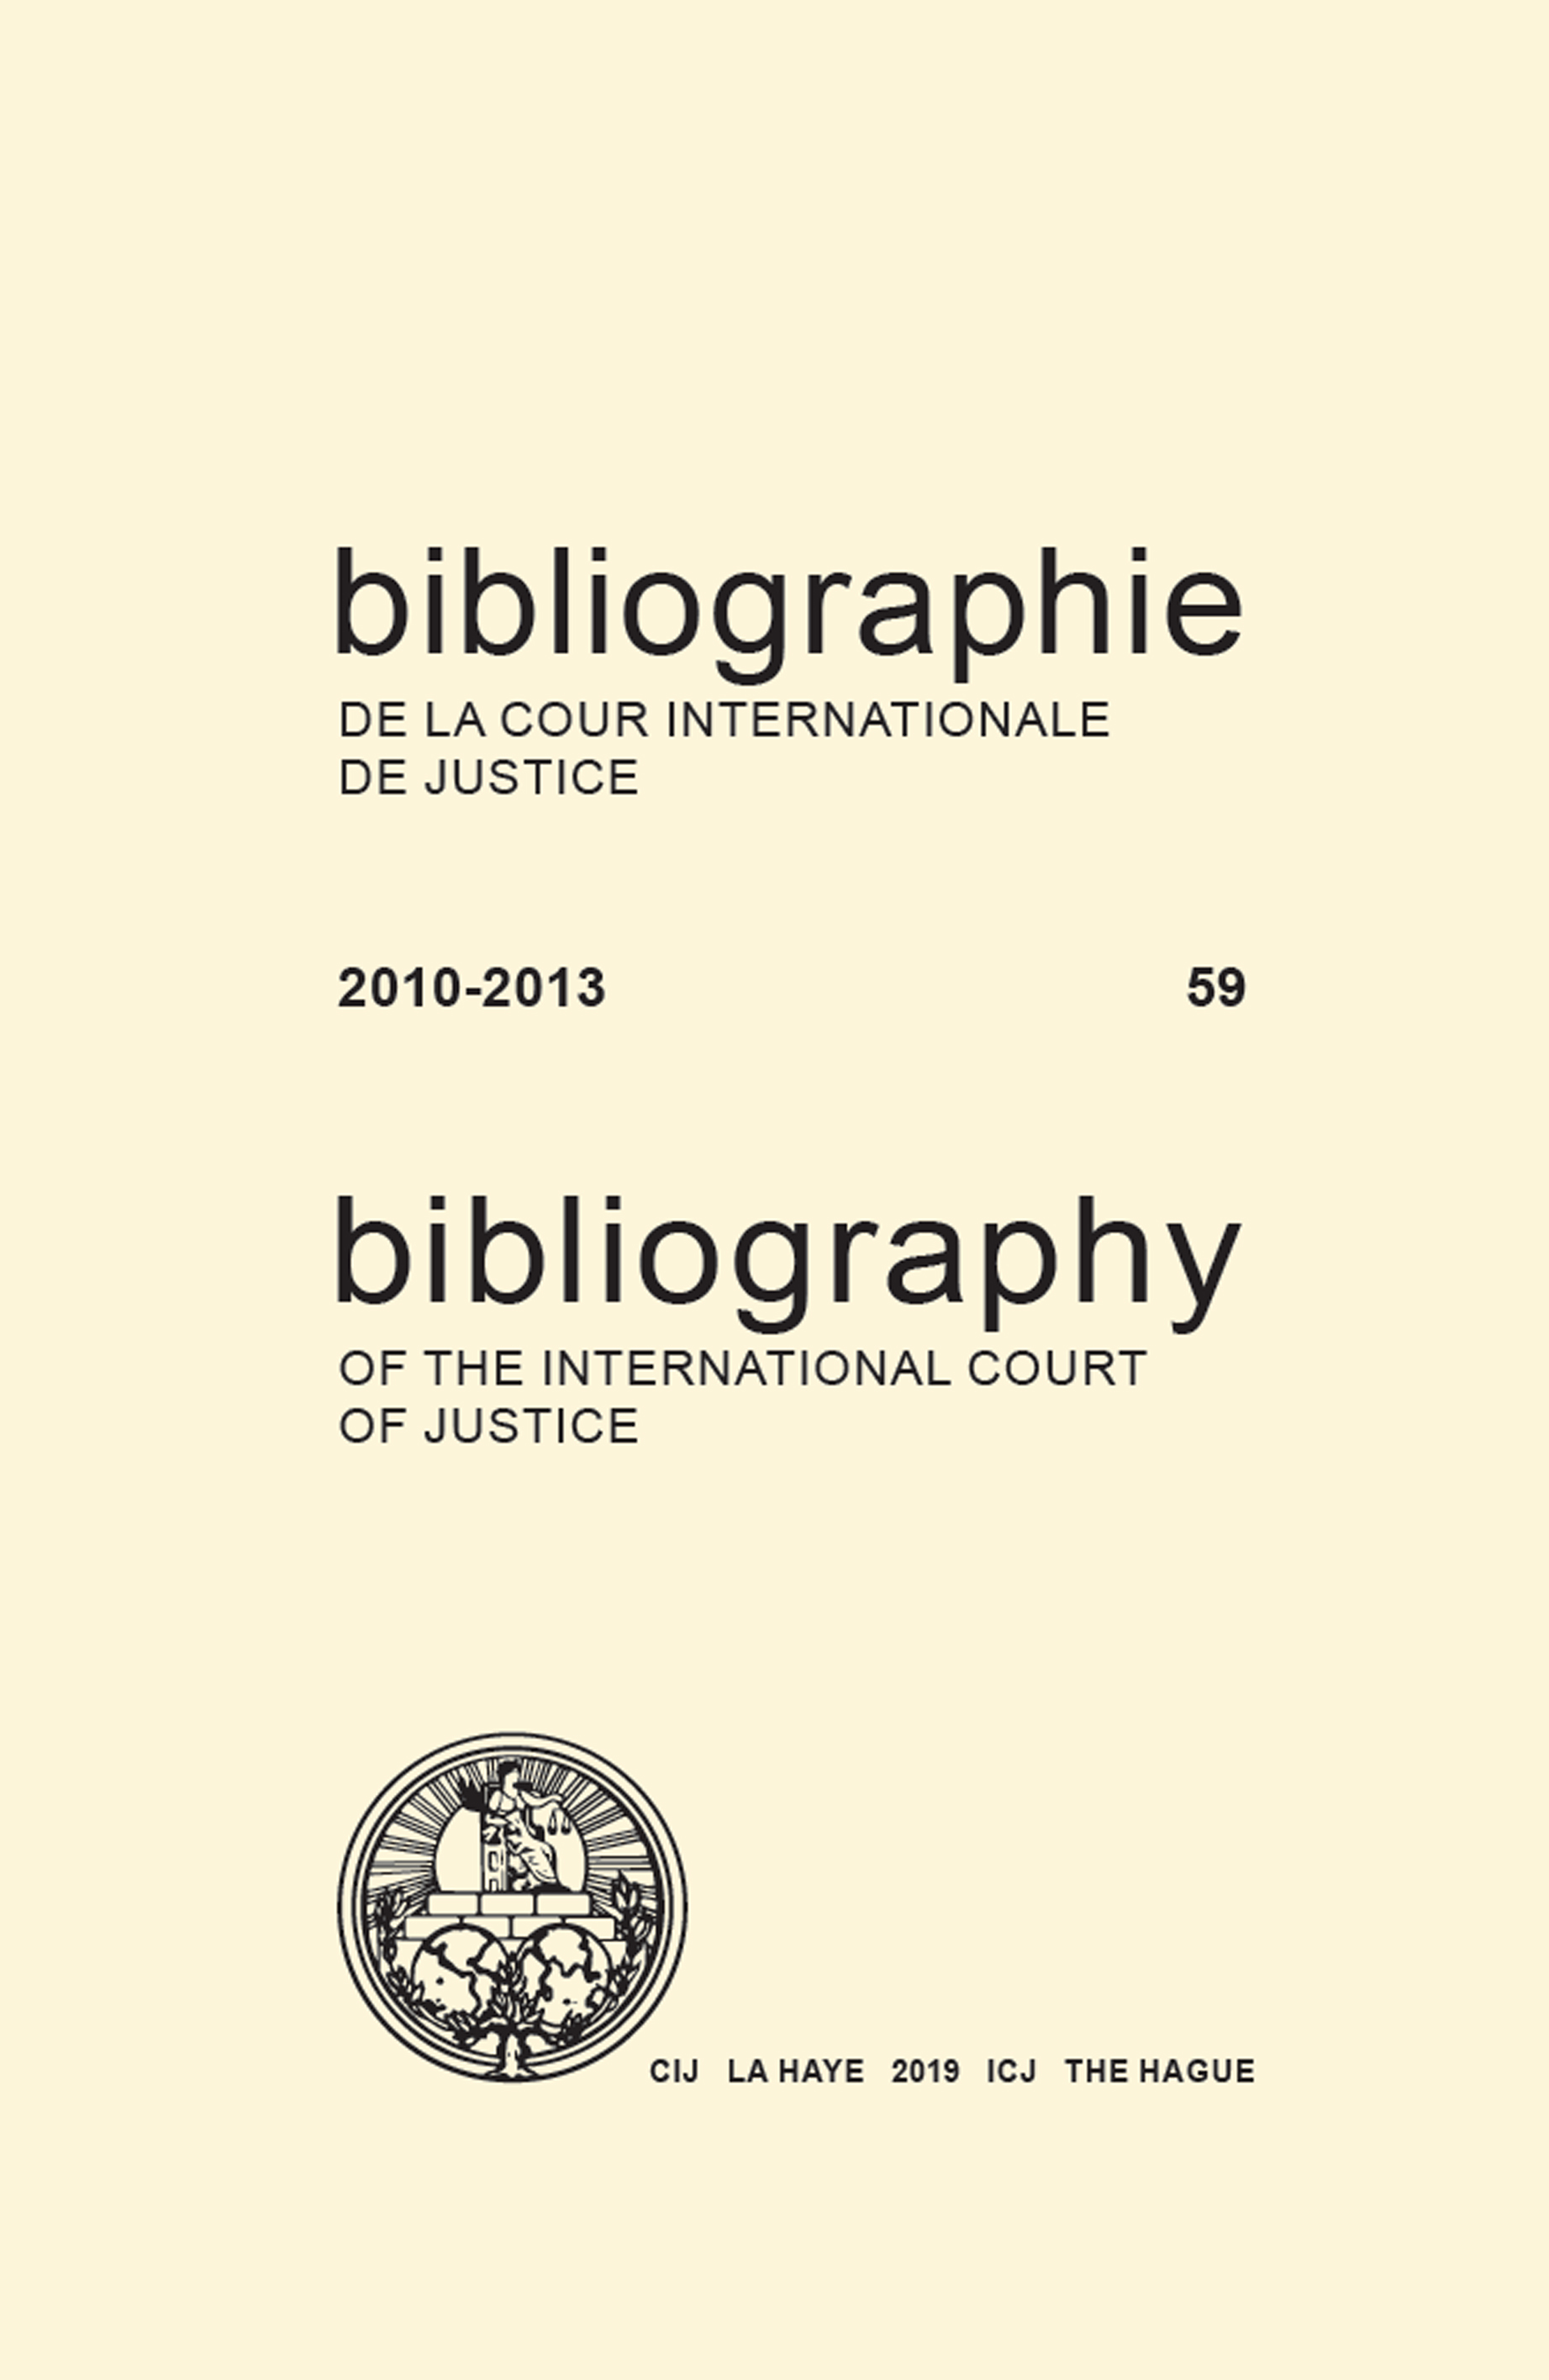 image of Bibliography of the International Court of Justice 2010-2013